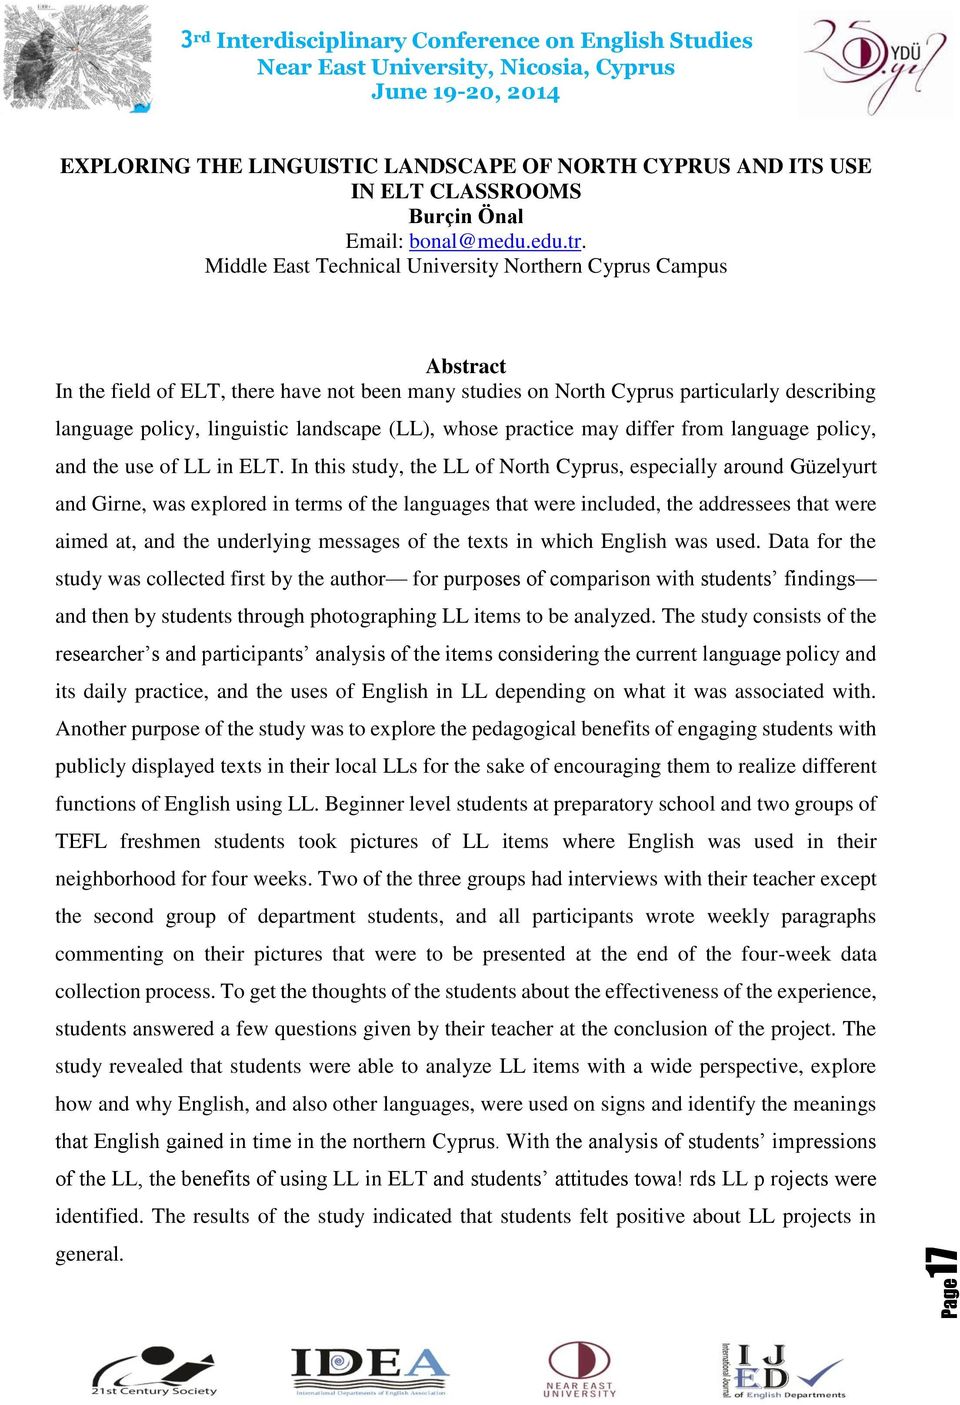 practice may differ from language policy, and the use of LL in ELT.